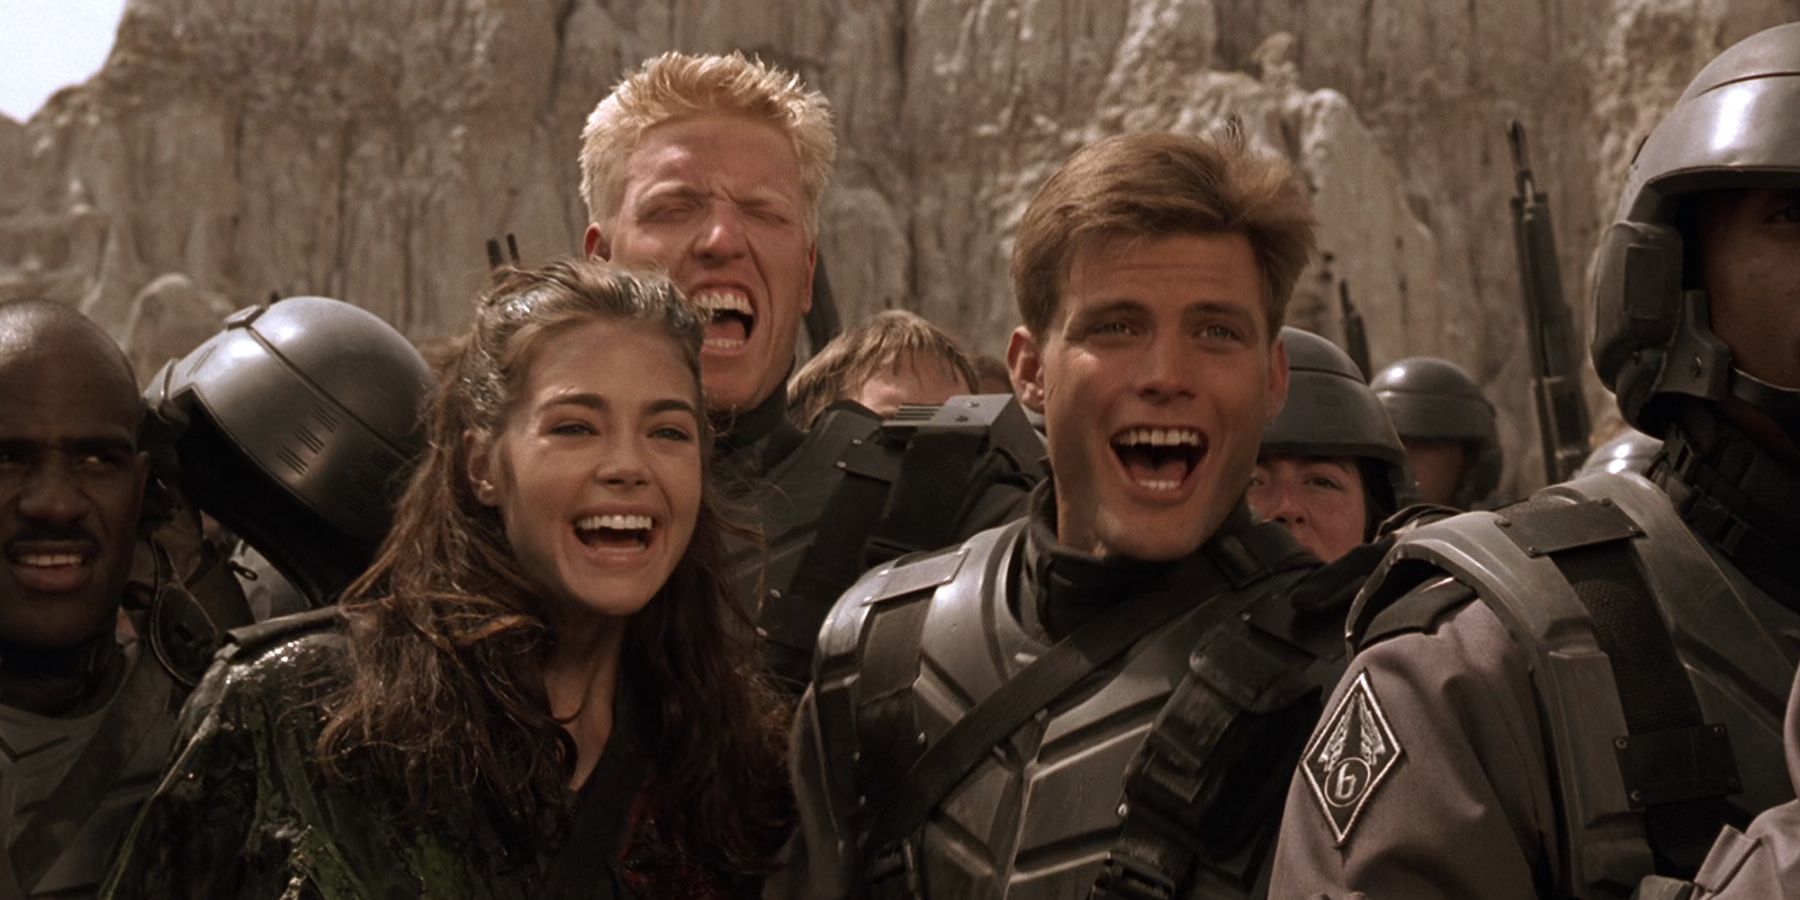 Starship Troopers' laughing soldiers.